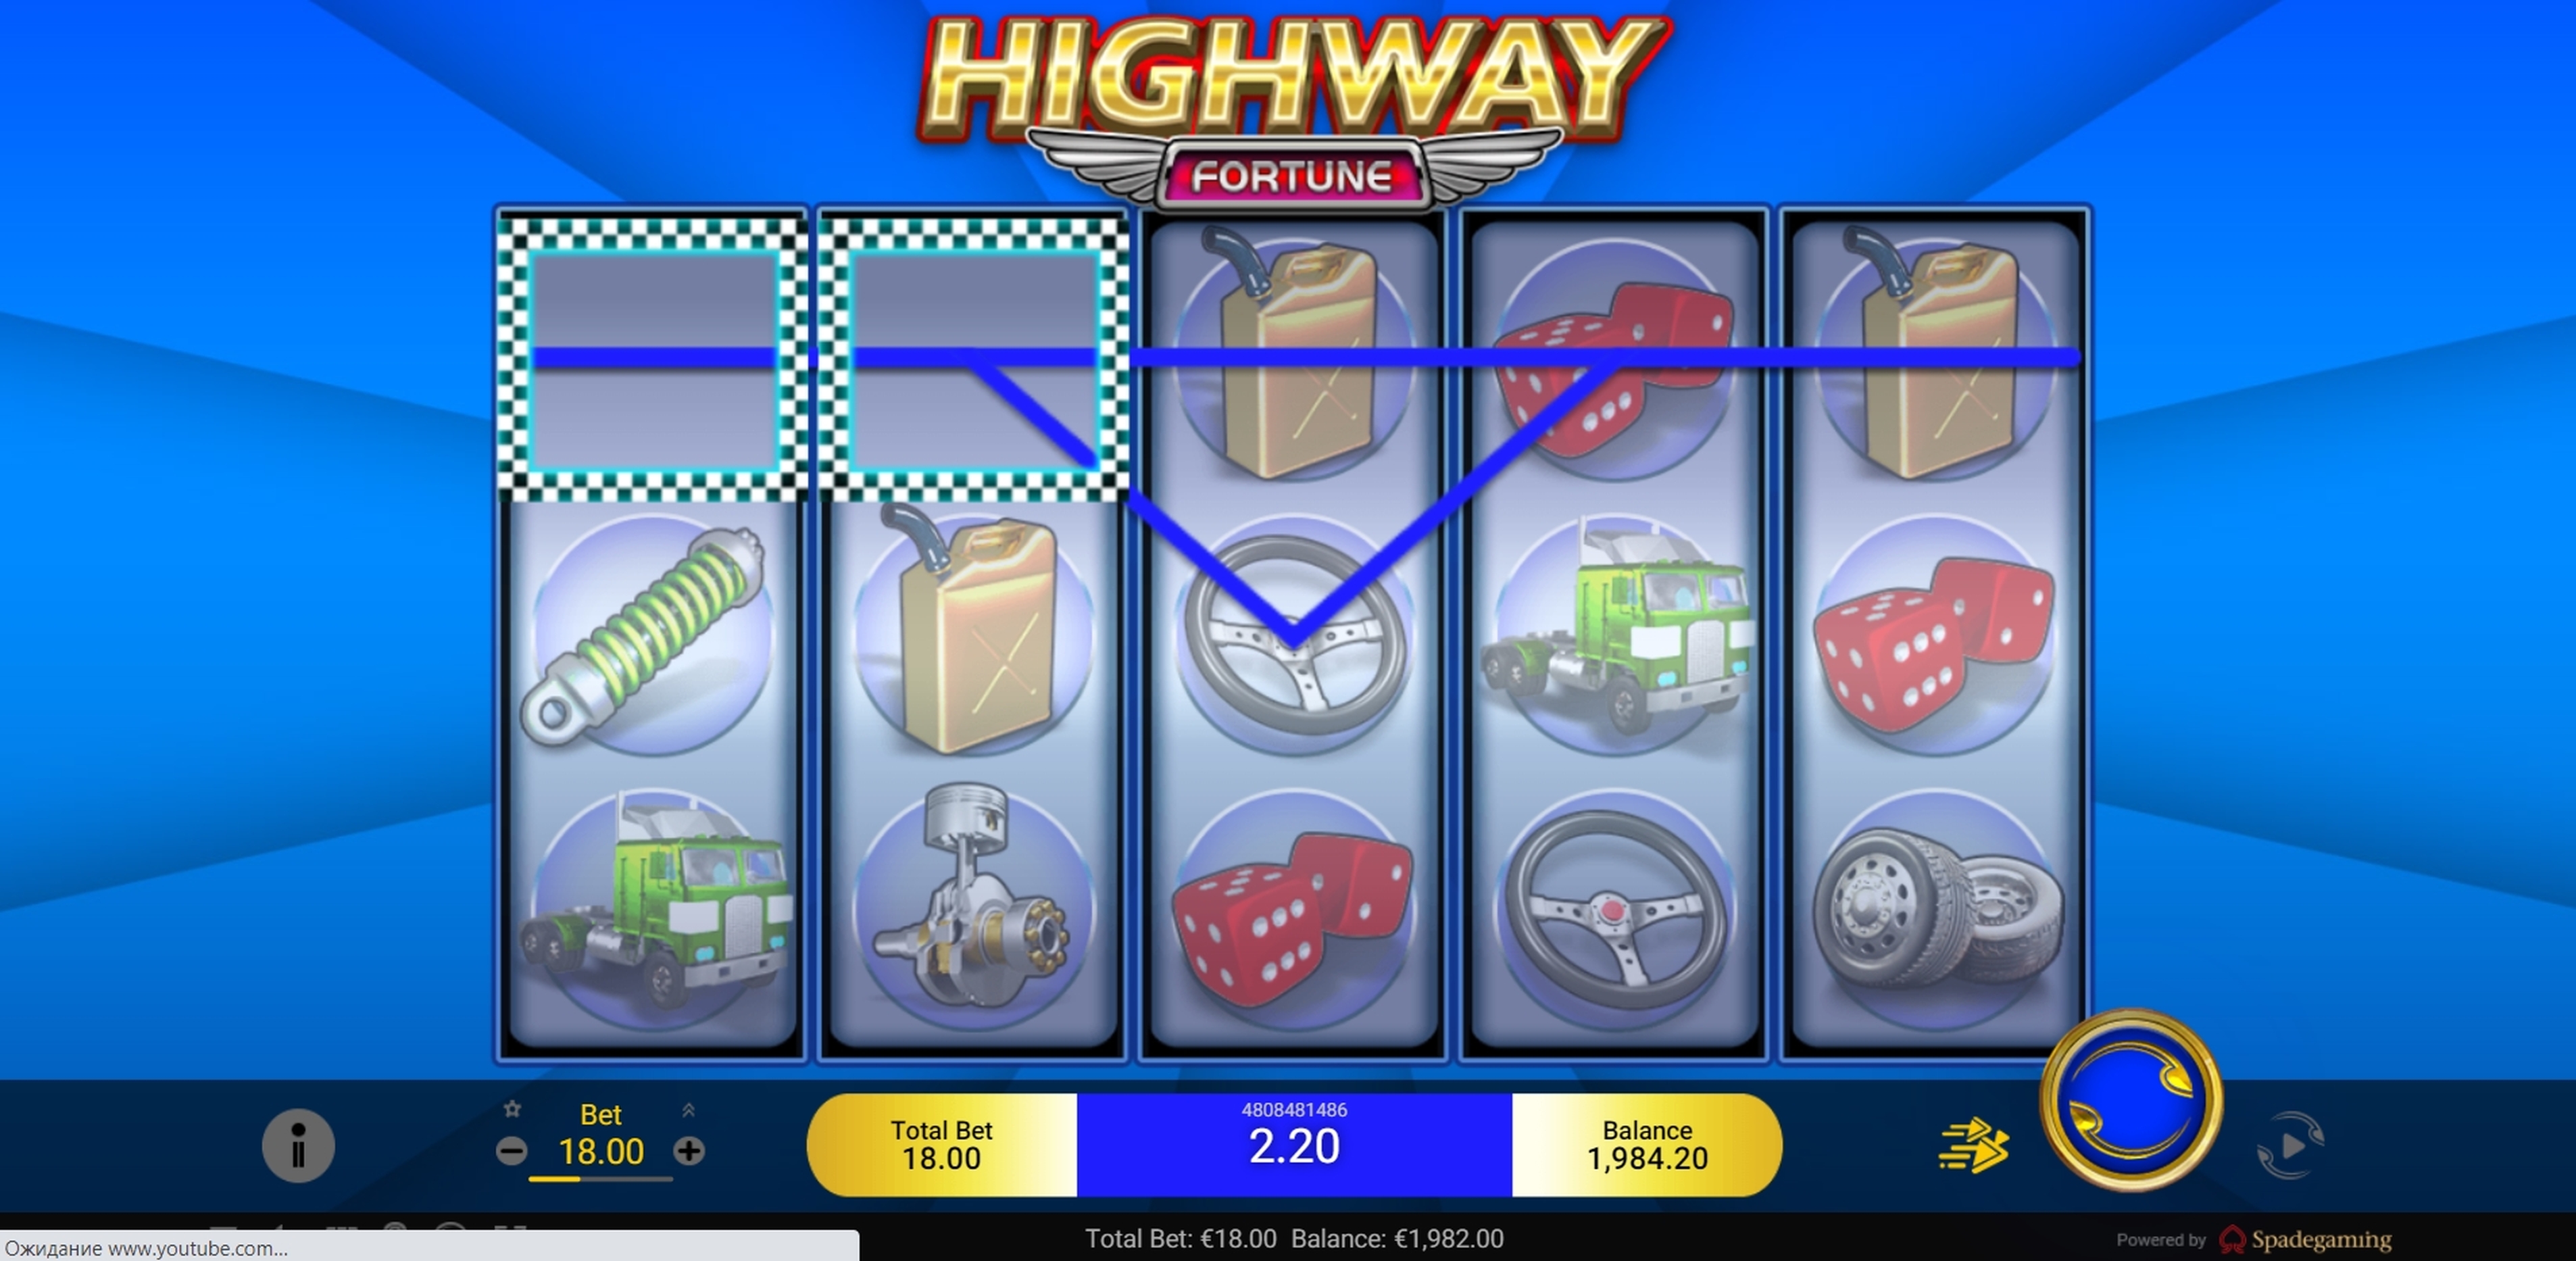 Win Money in Highway Fortune Free Slot Game by Spade Gaming